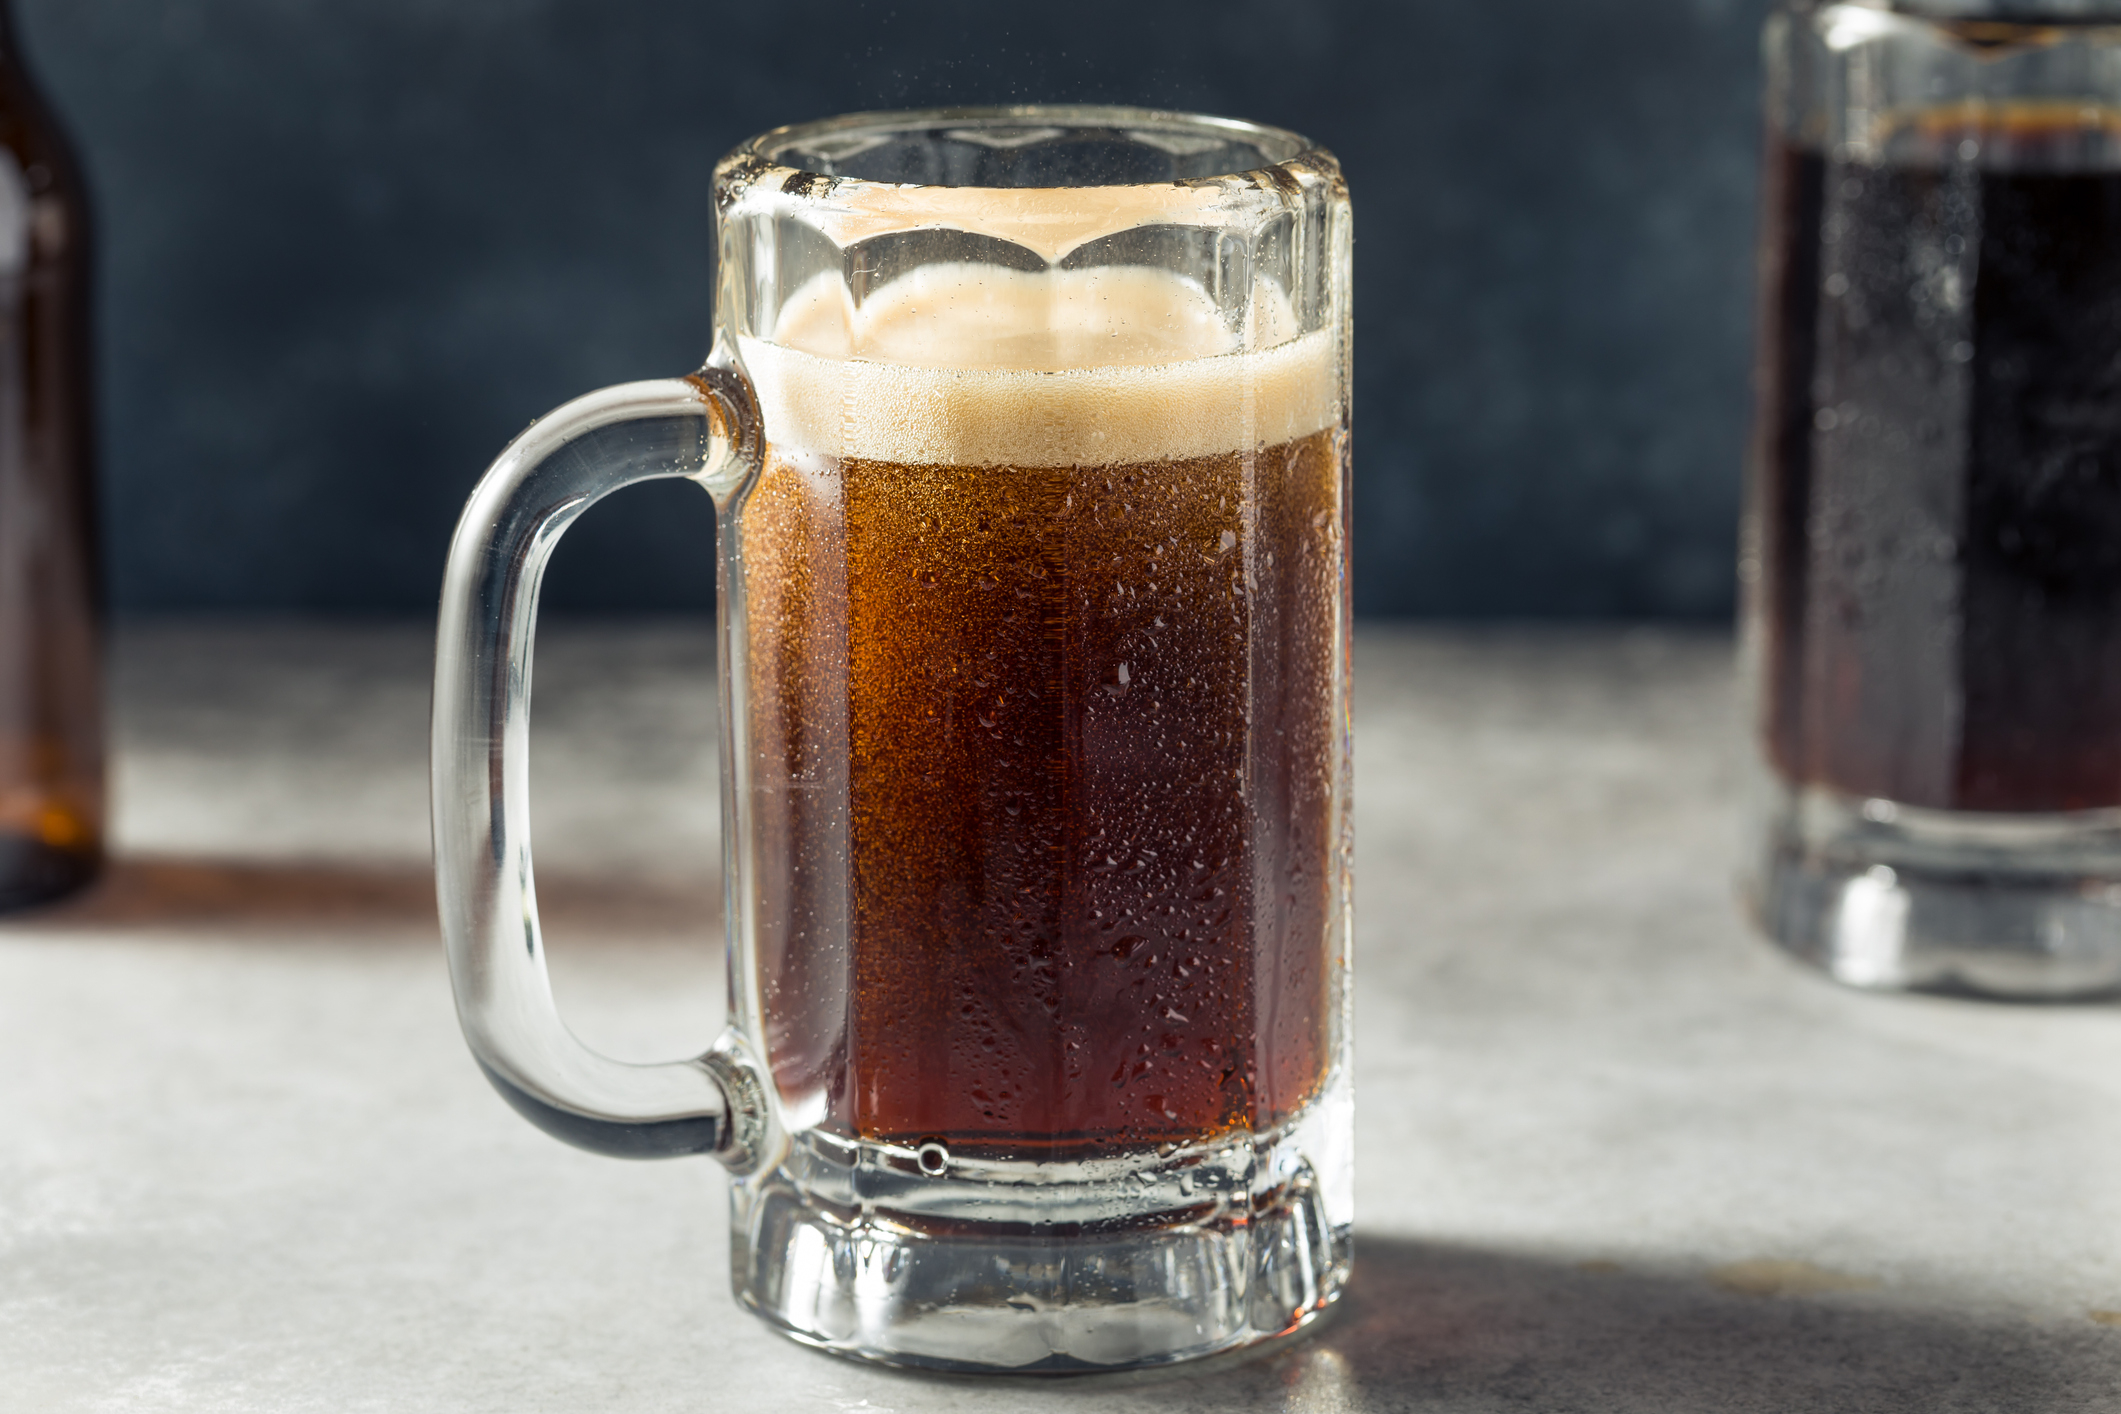 Mug of beer with frothy head on table, background with dark bottle and glass